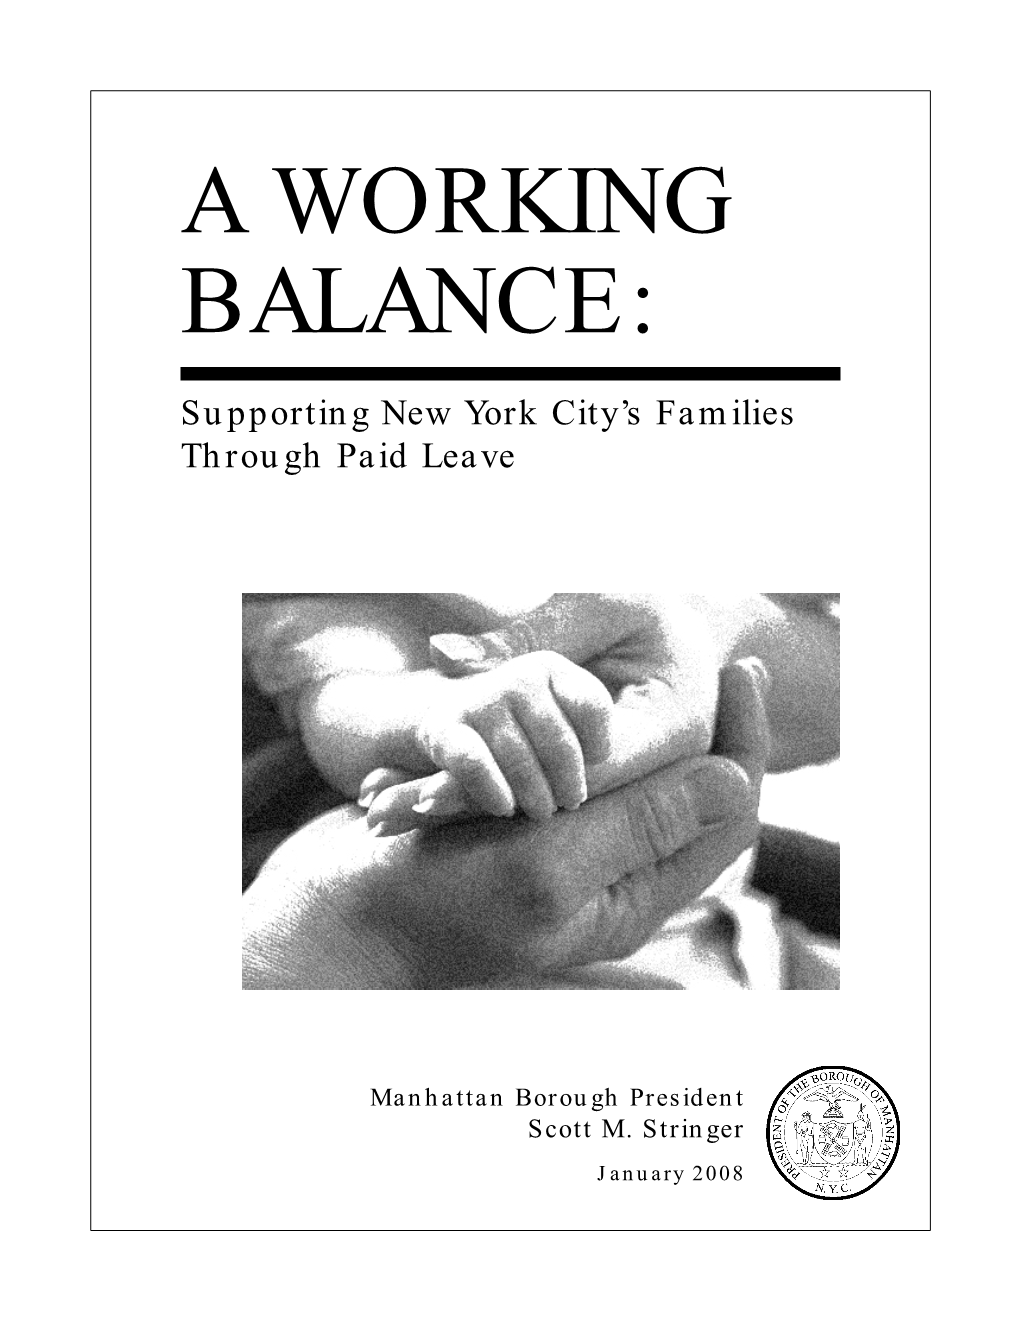 Family Leave Policies on Working Adults with Family Responsibilities in New York City